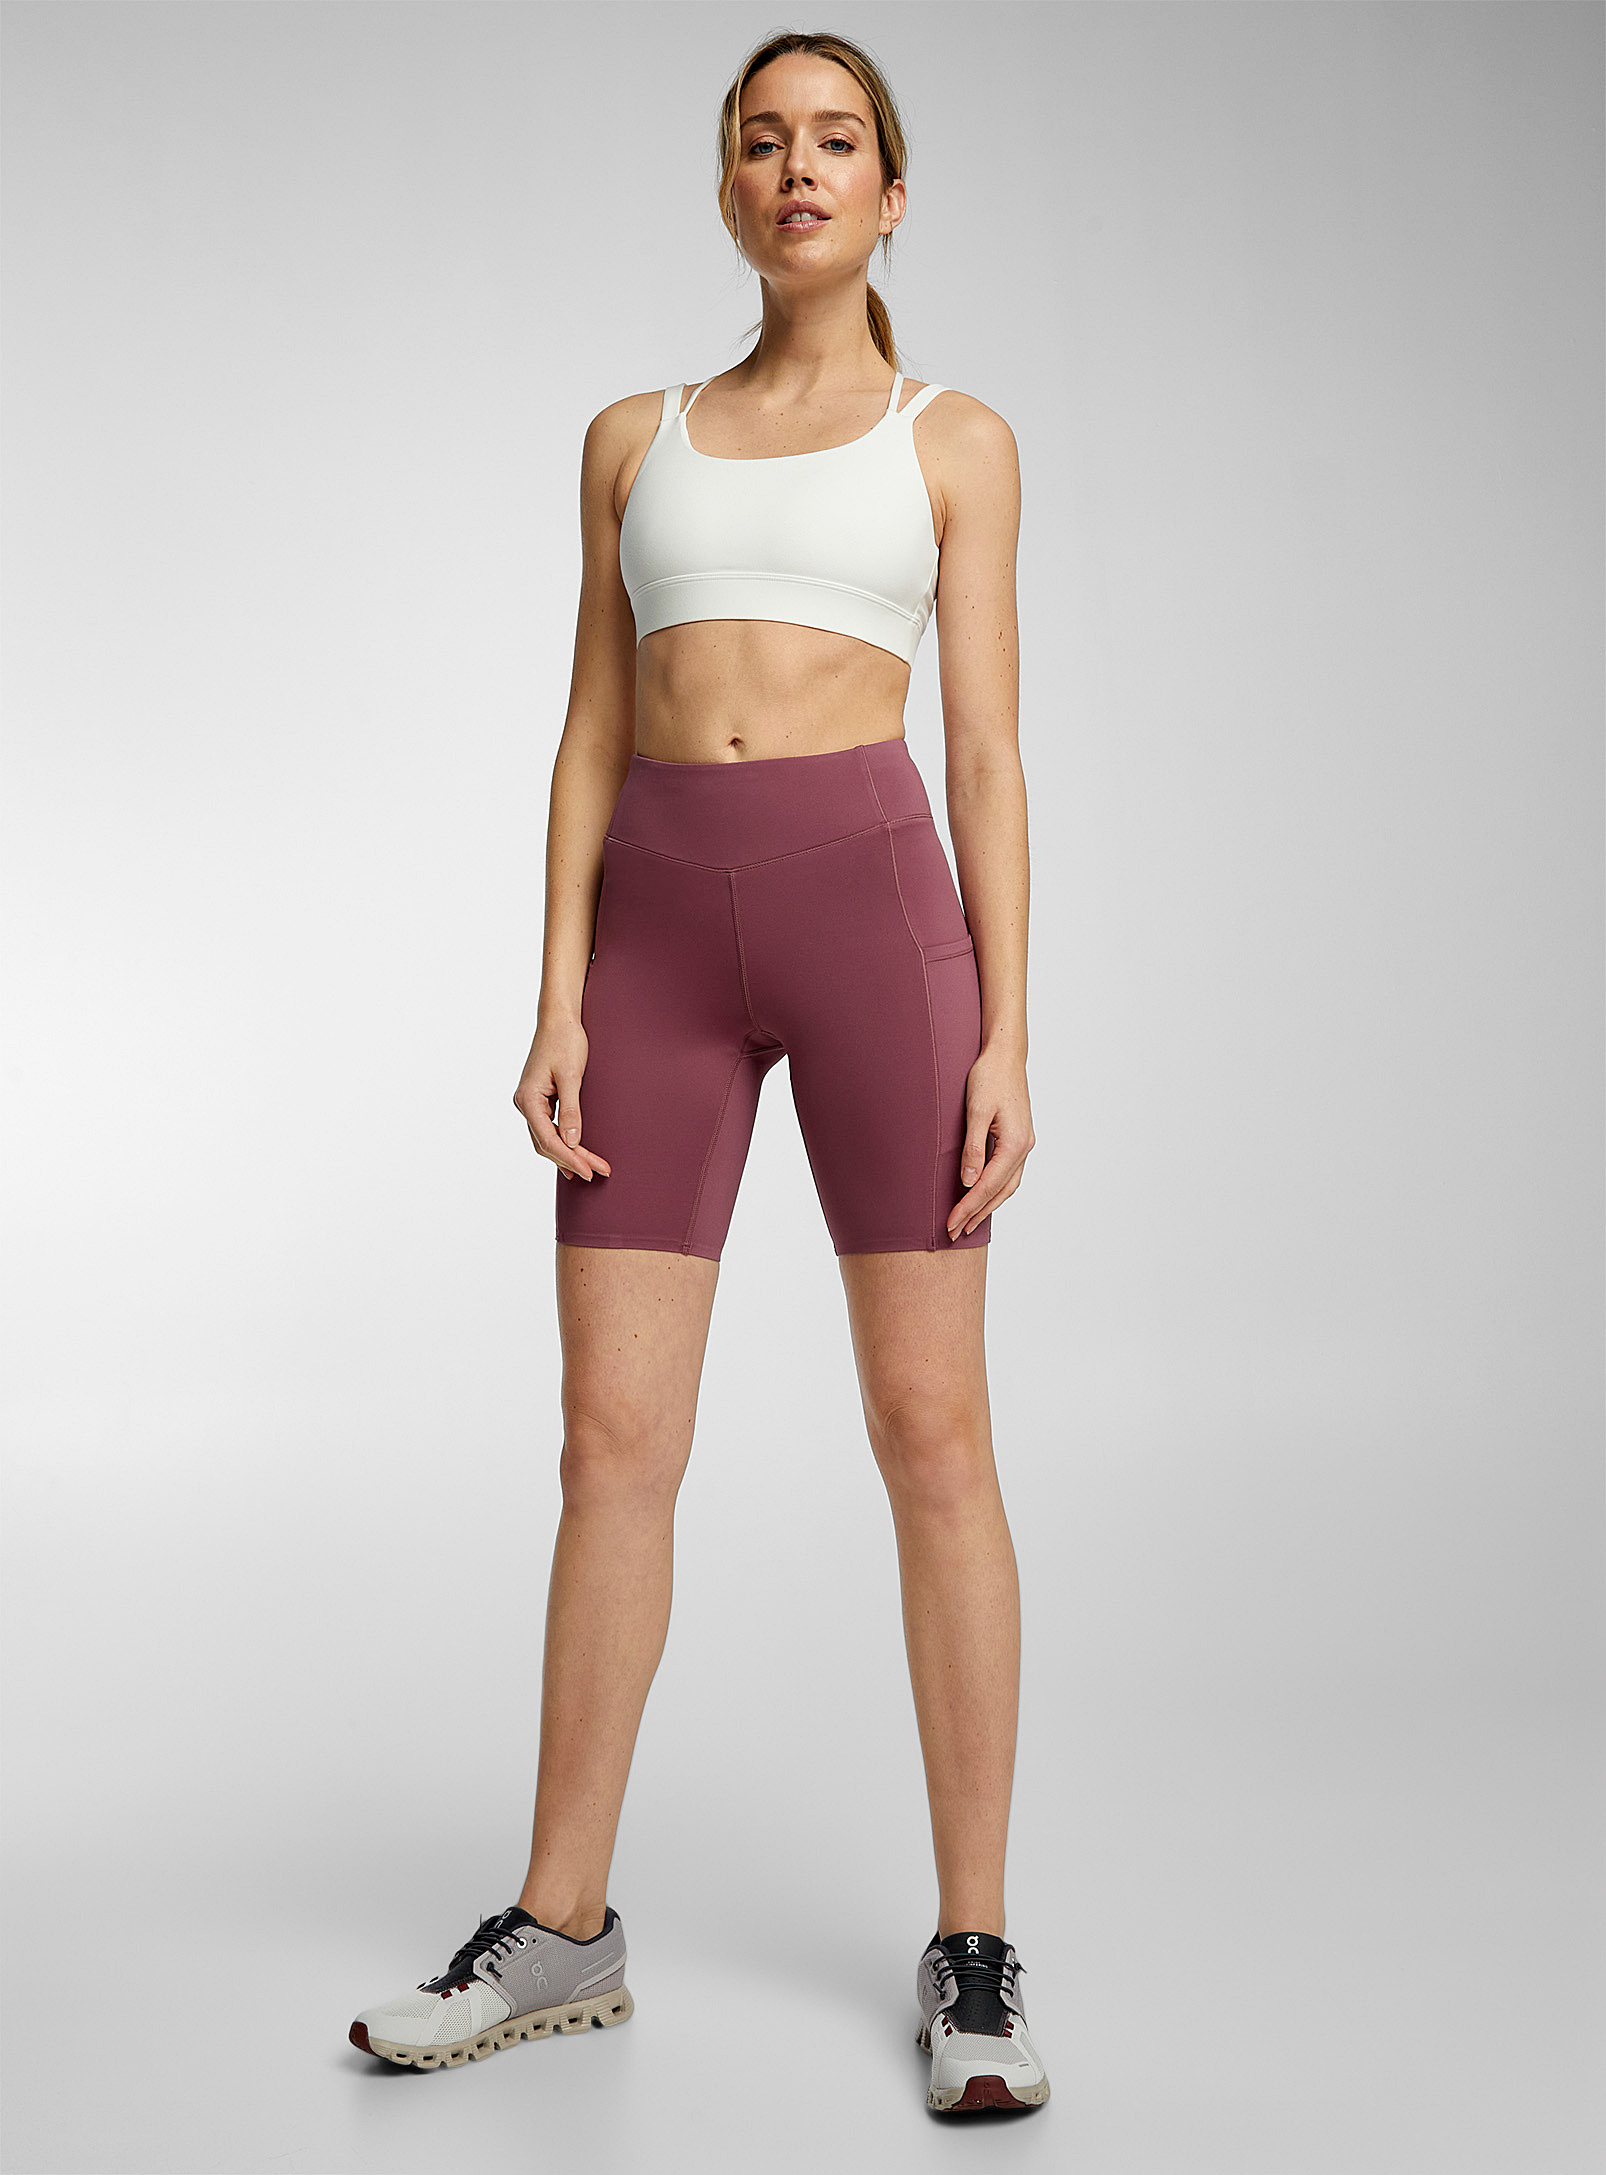 I.fiv5 Mid-thigh Pocket Cycling Short In Dusky Pink